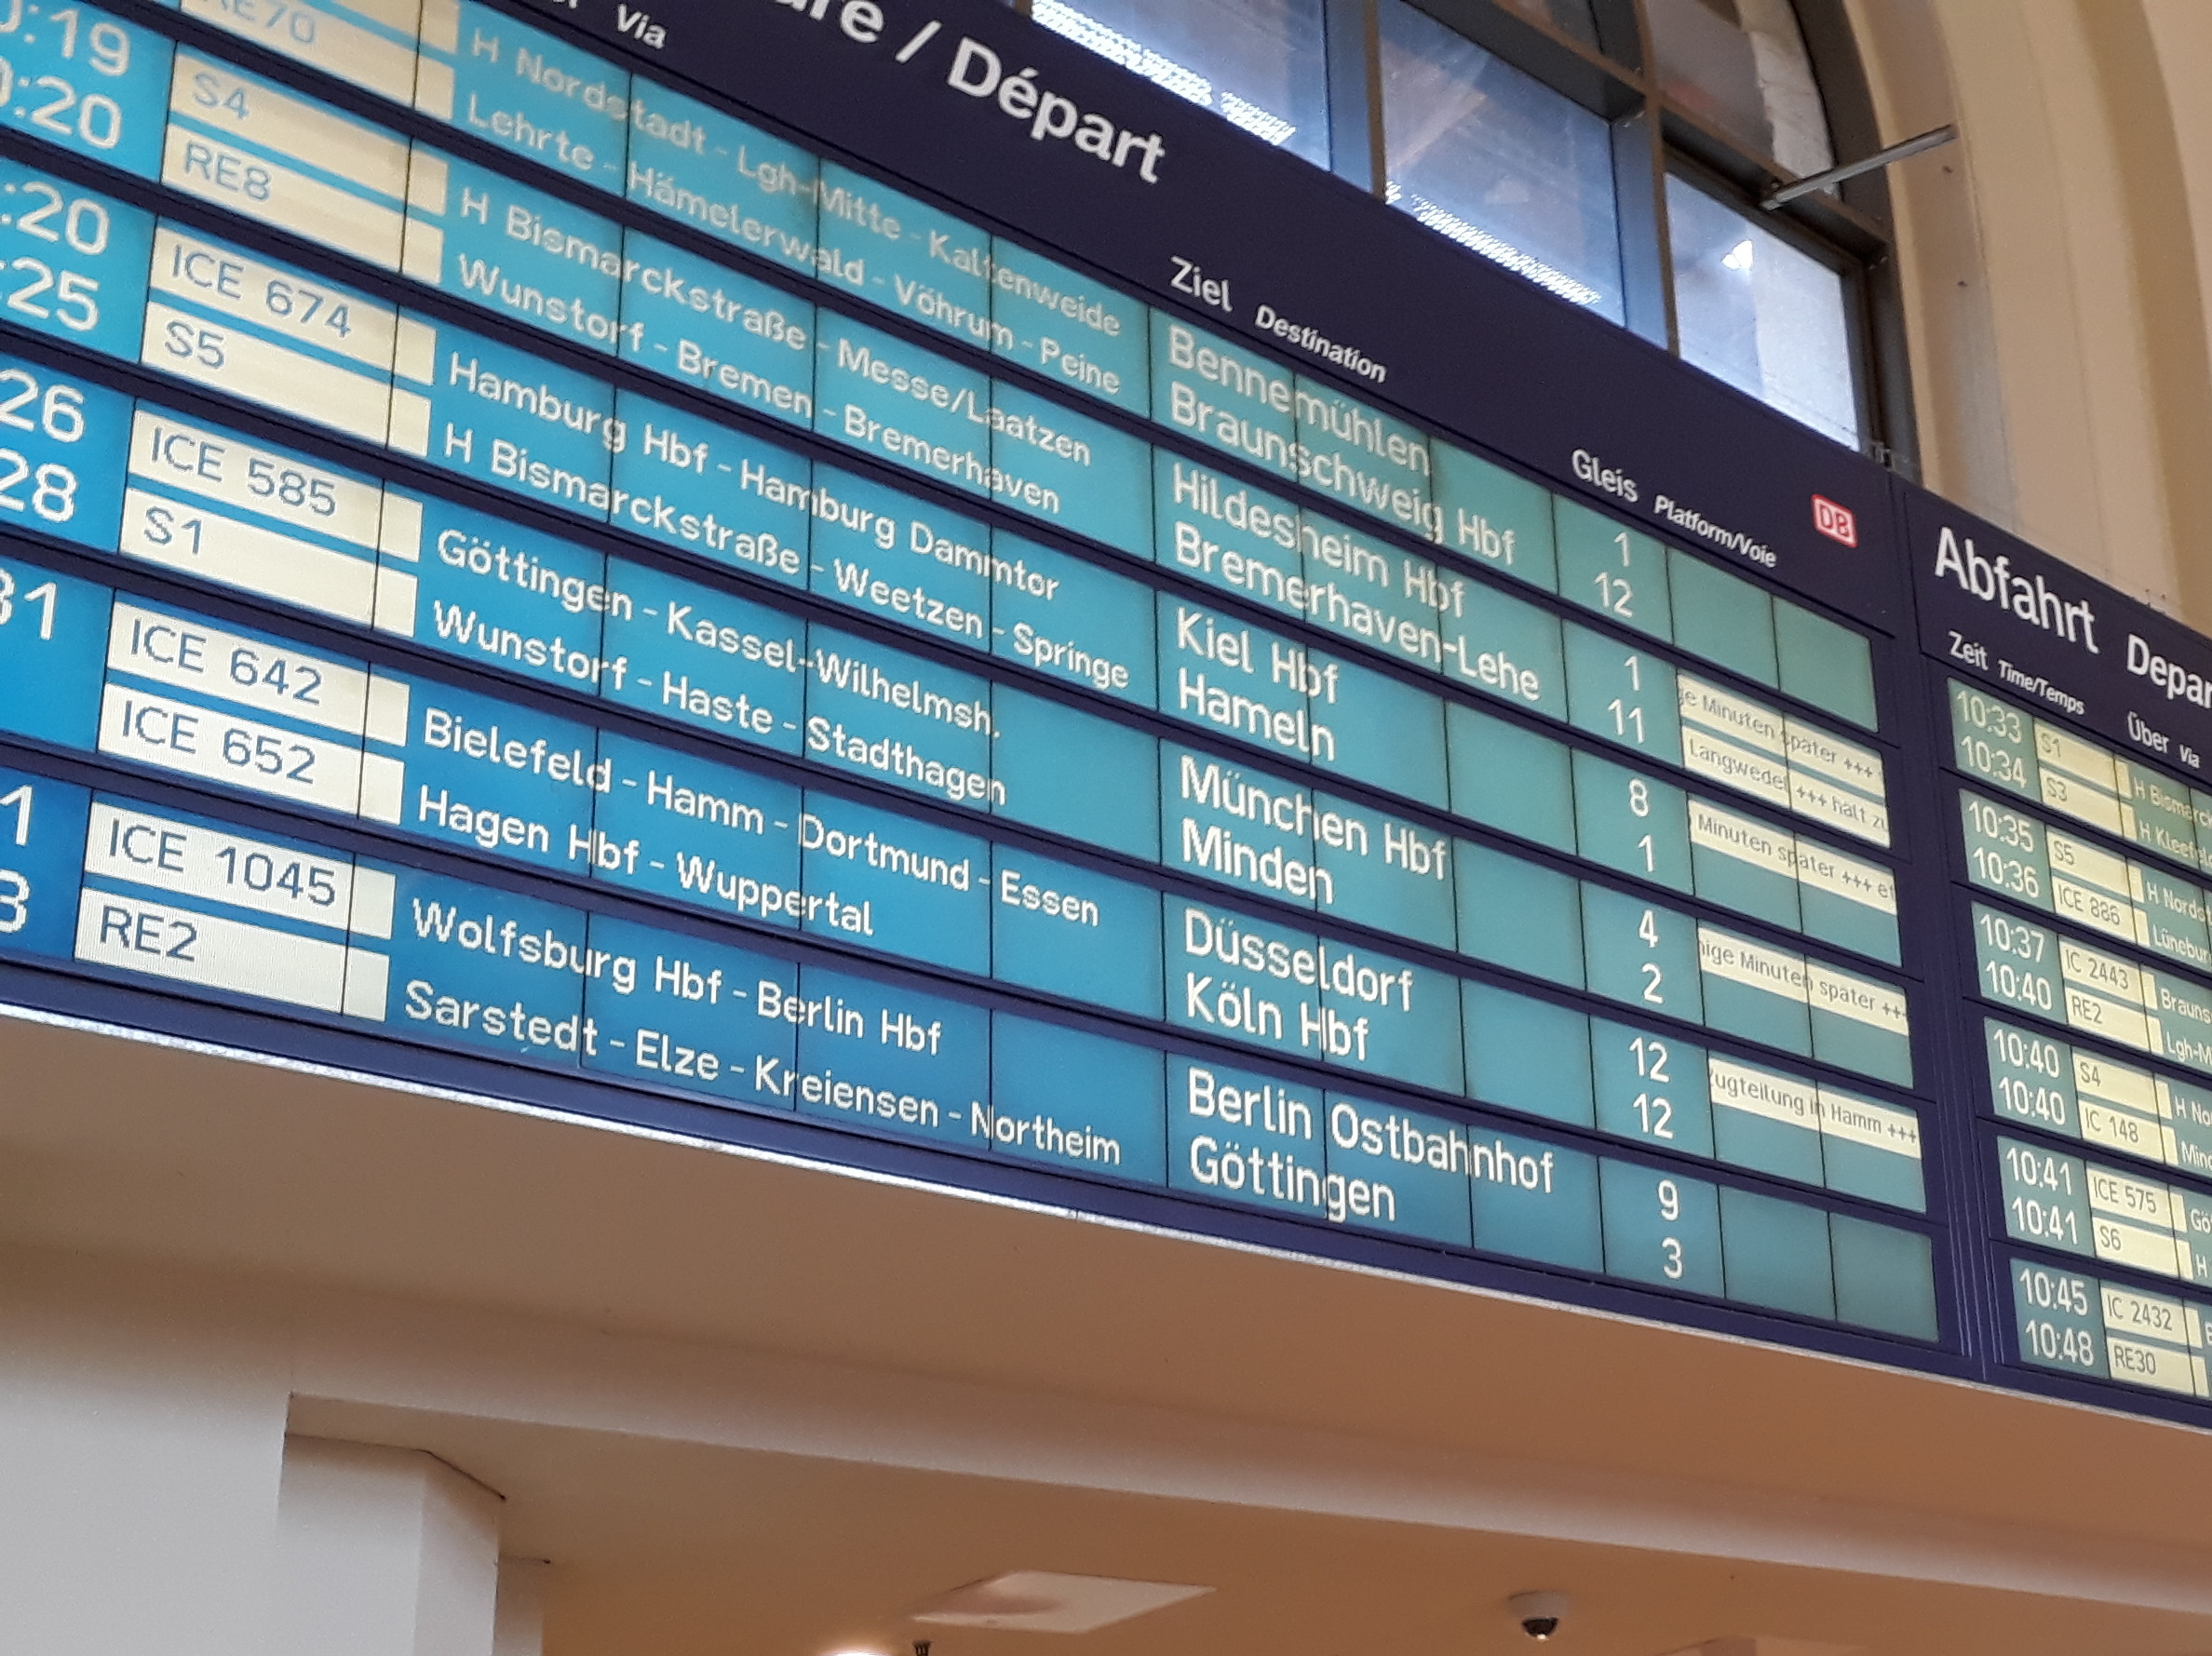 A departures screen in a German railway station